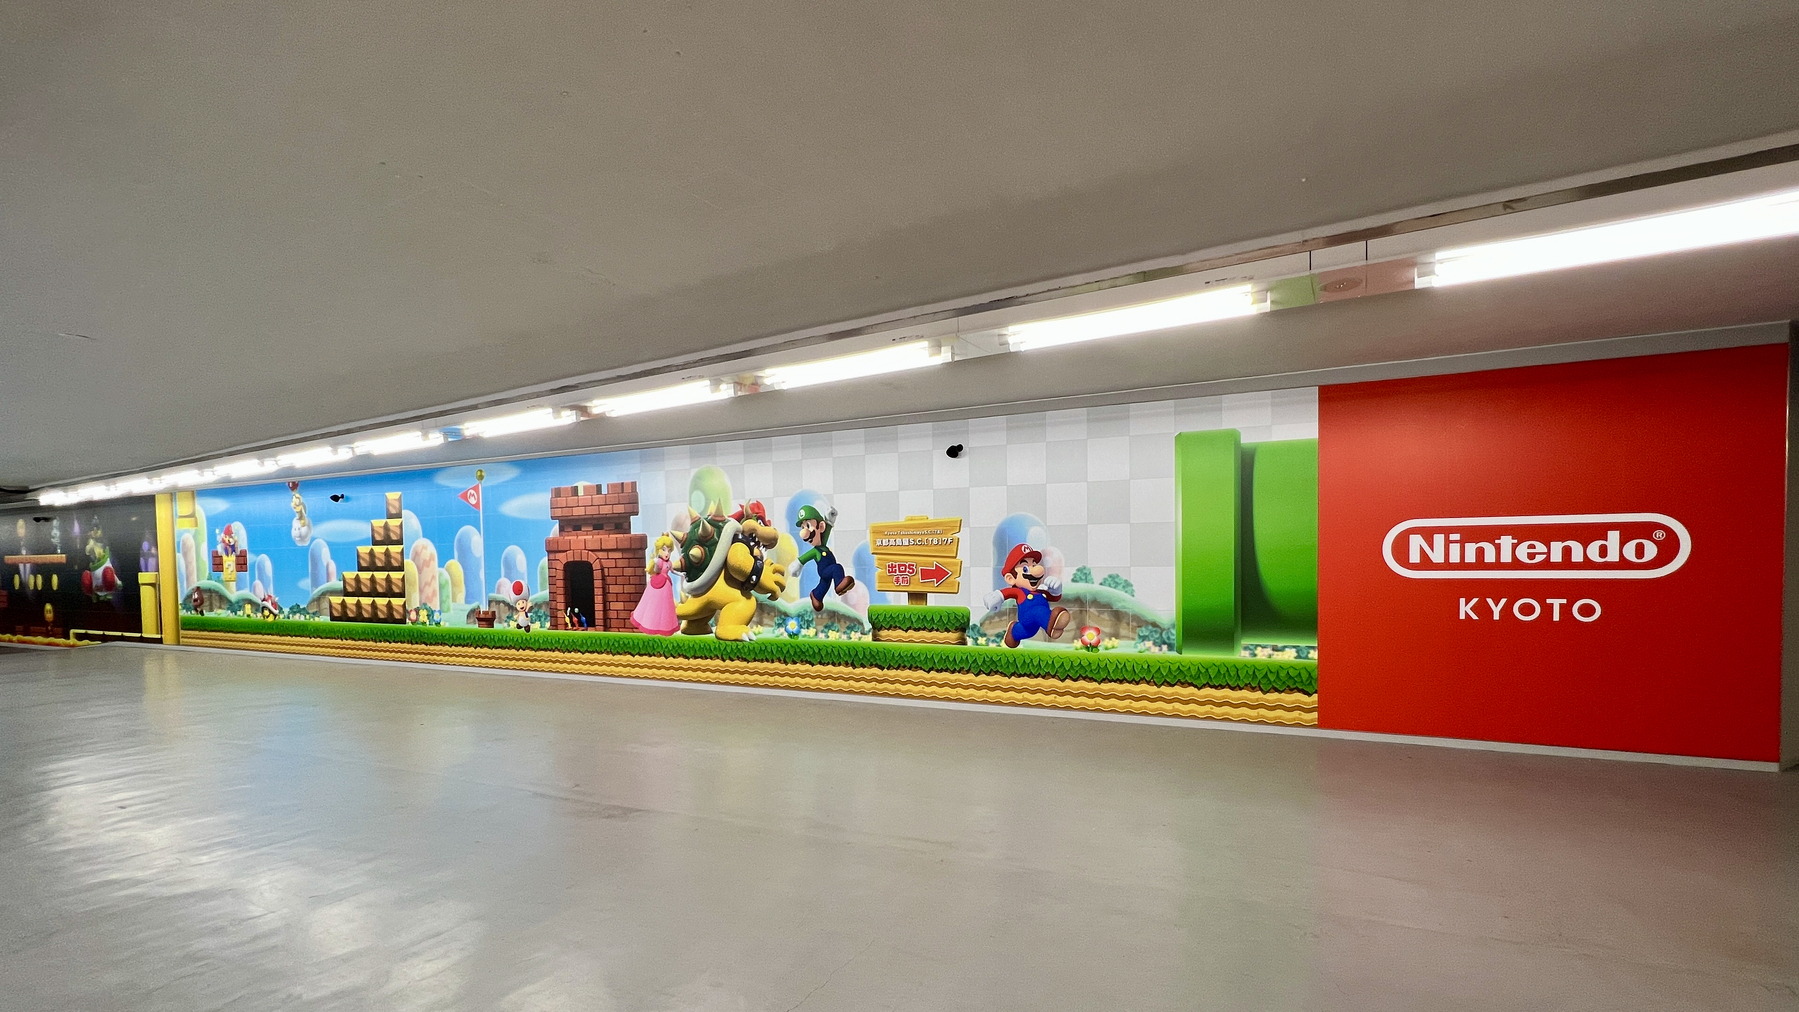 Illustration of Mario, Luigi, Peach, Bowser, and Toad in front of a castle. A large sign says "Nintendo Kyoto"